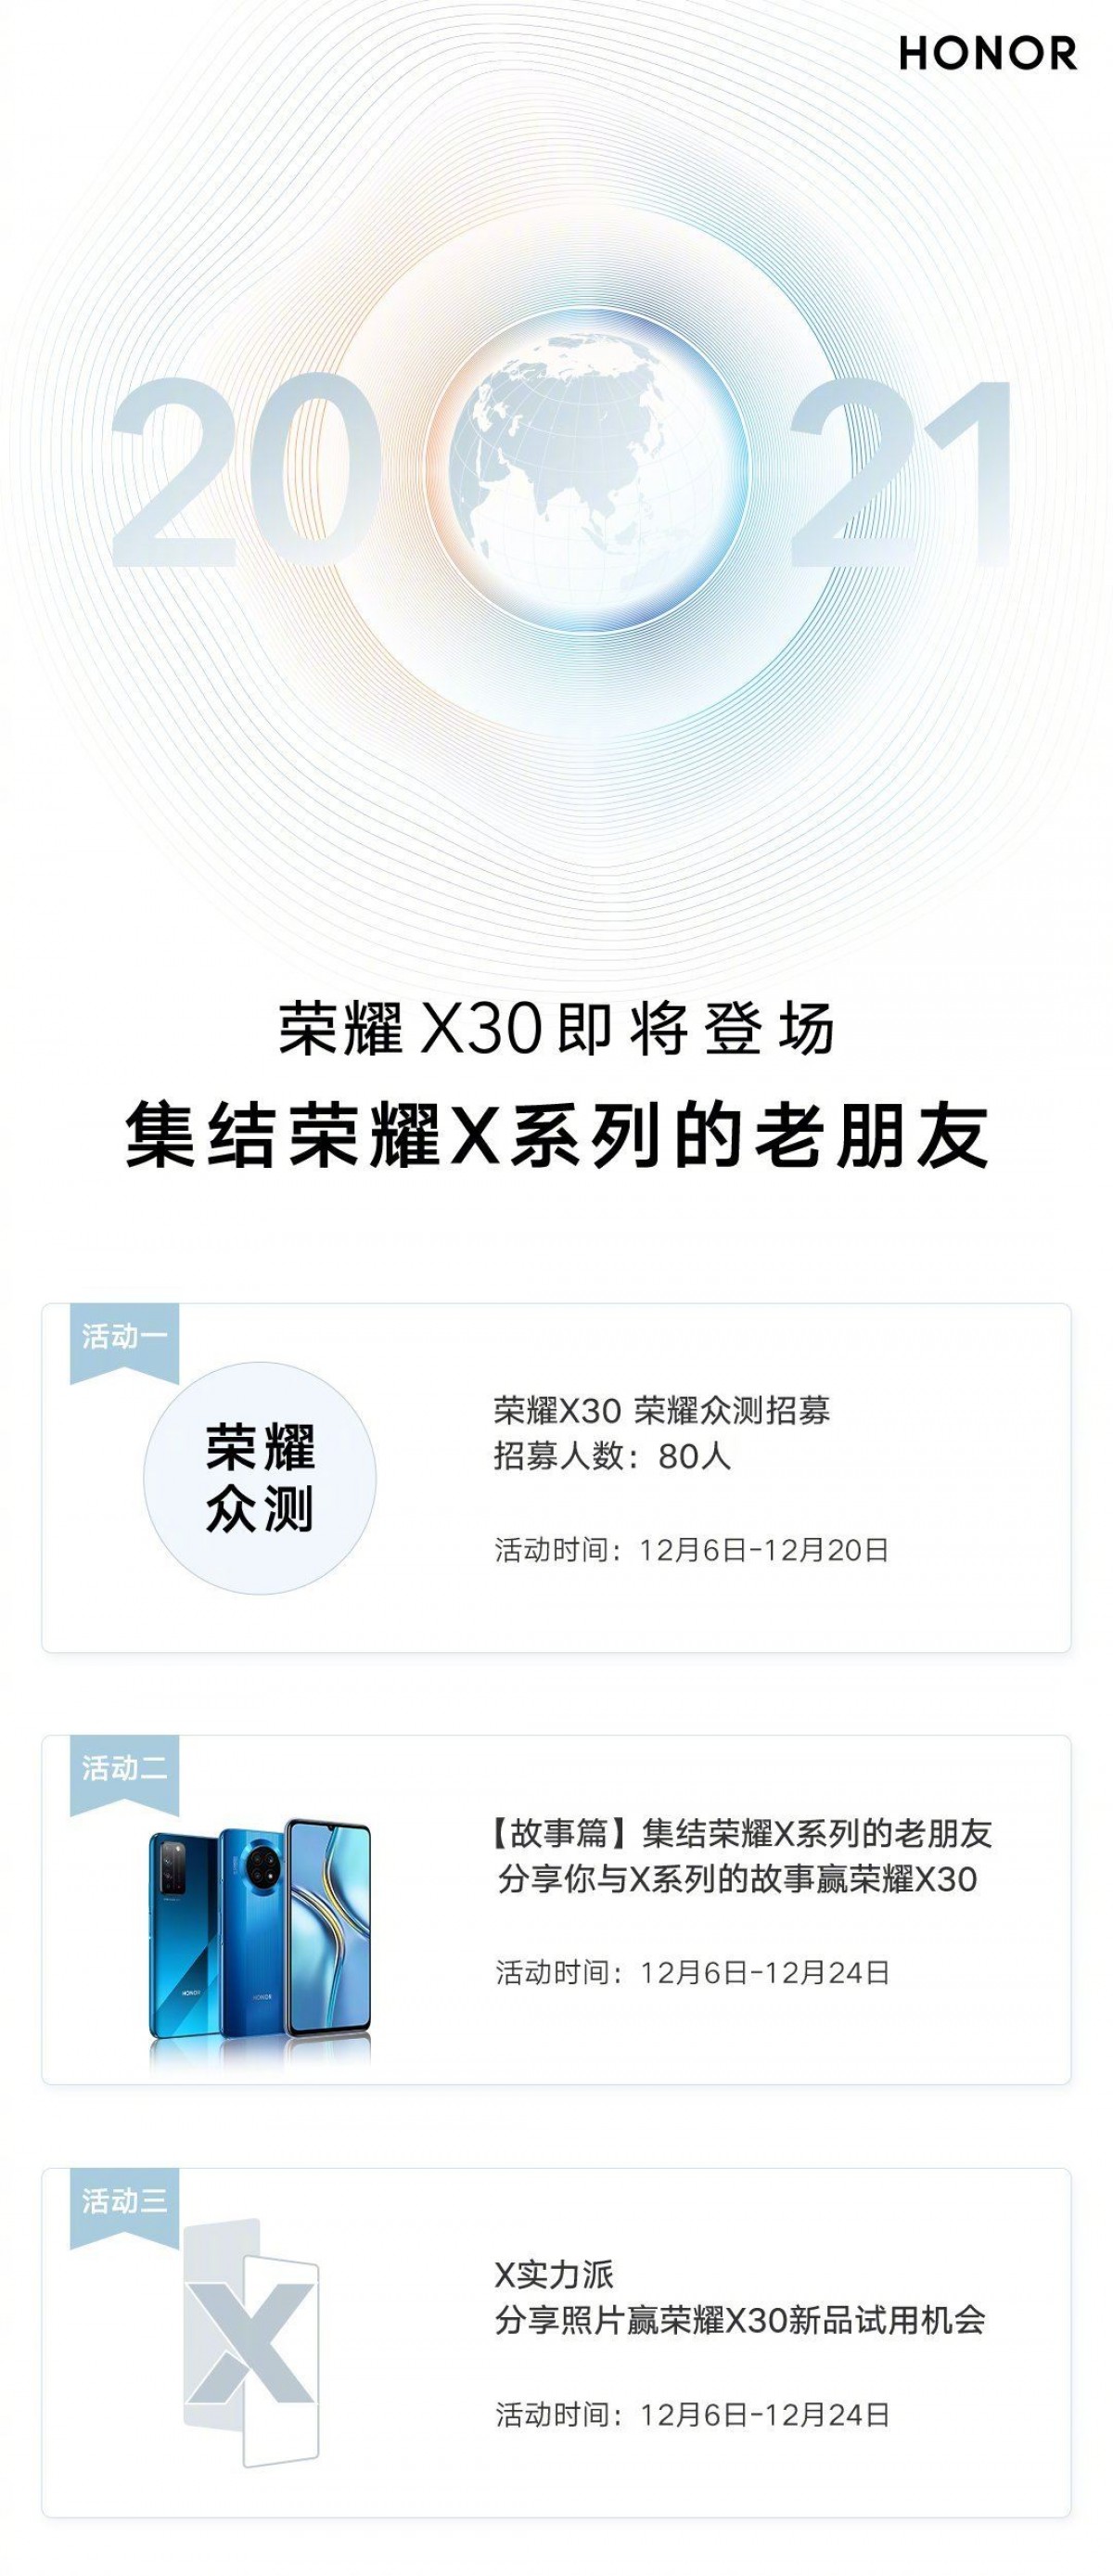 Honor X30 will arrive on December 16